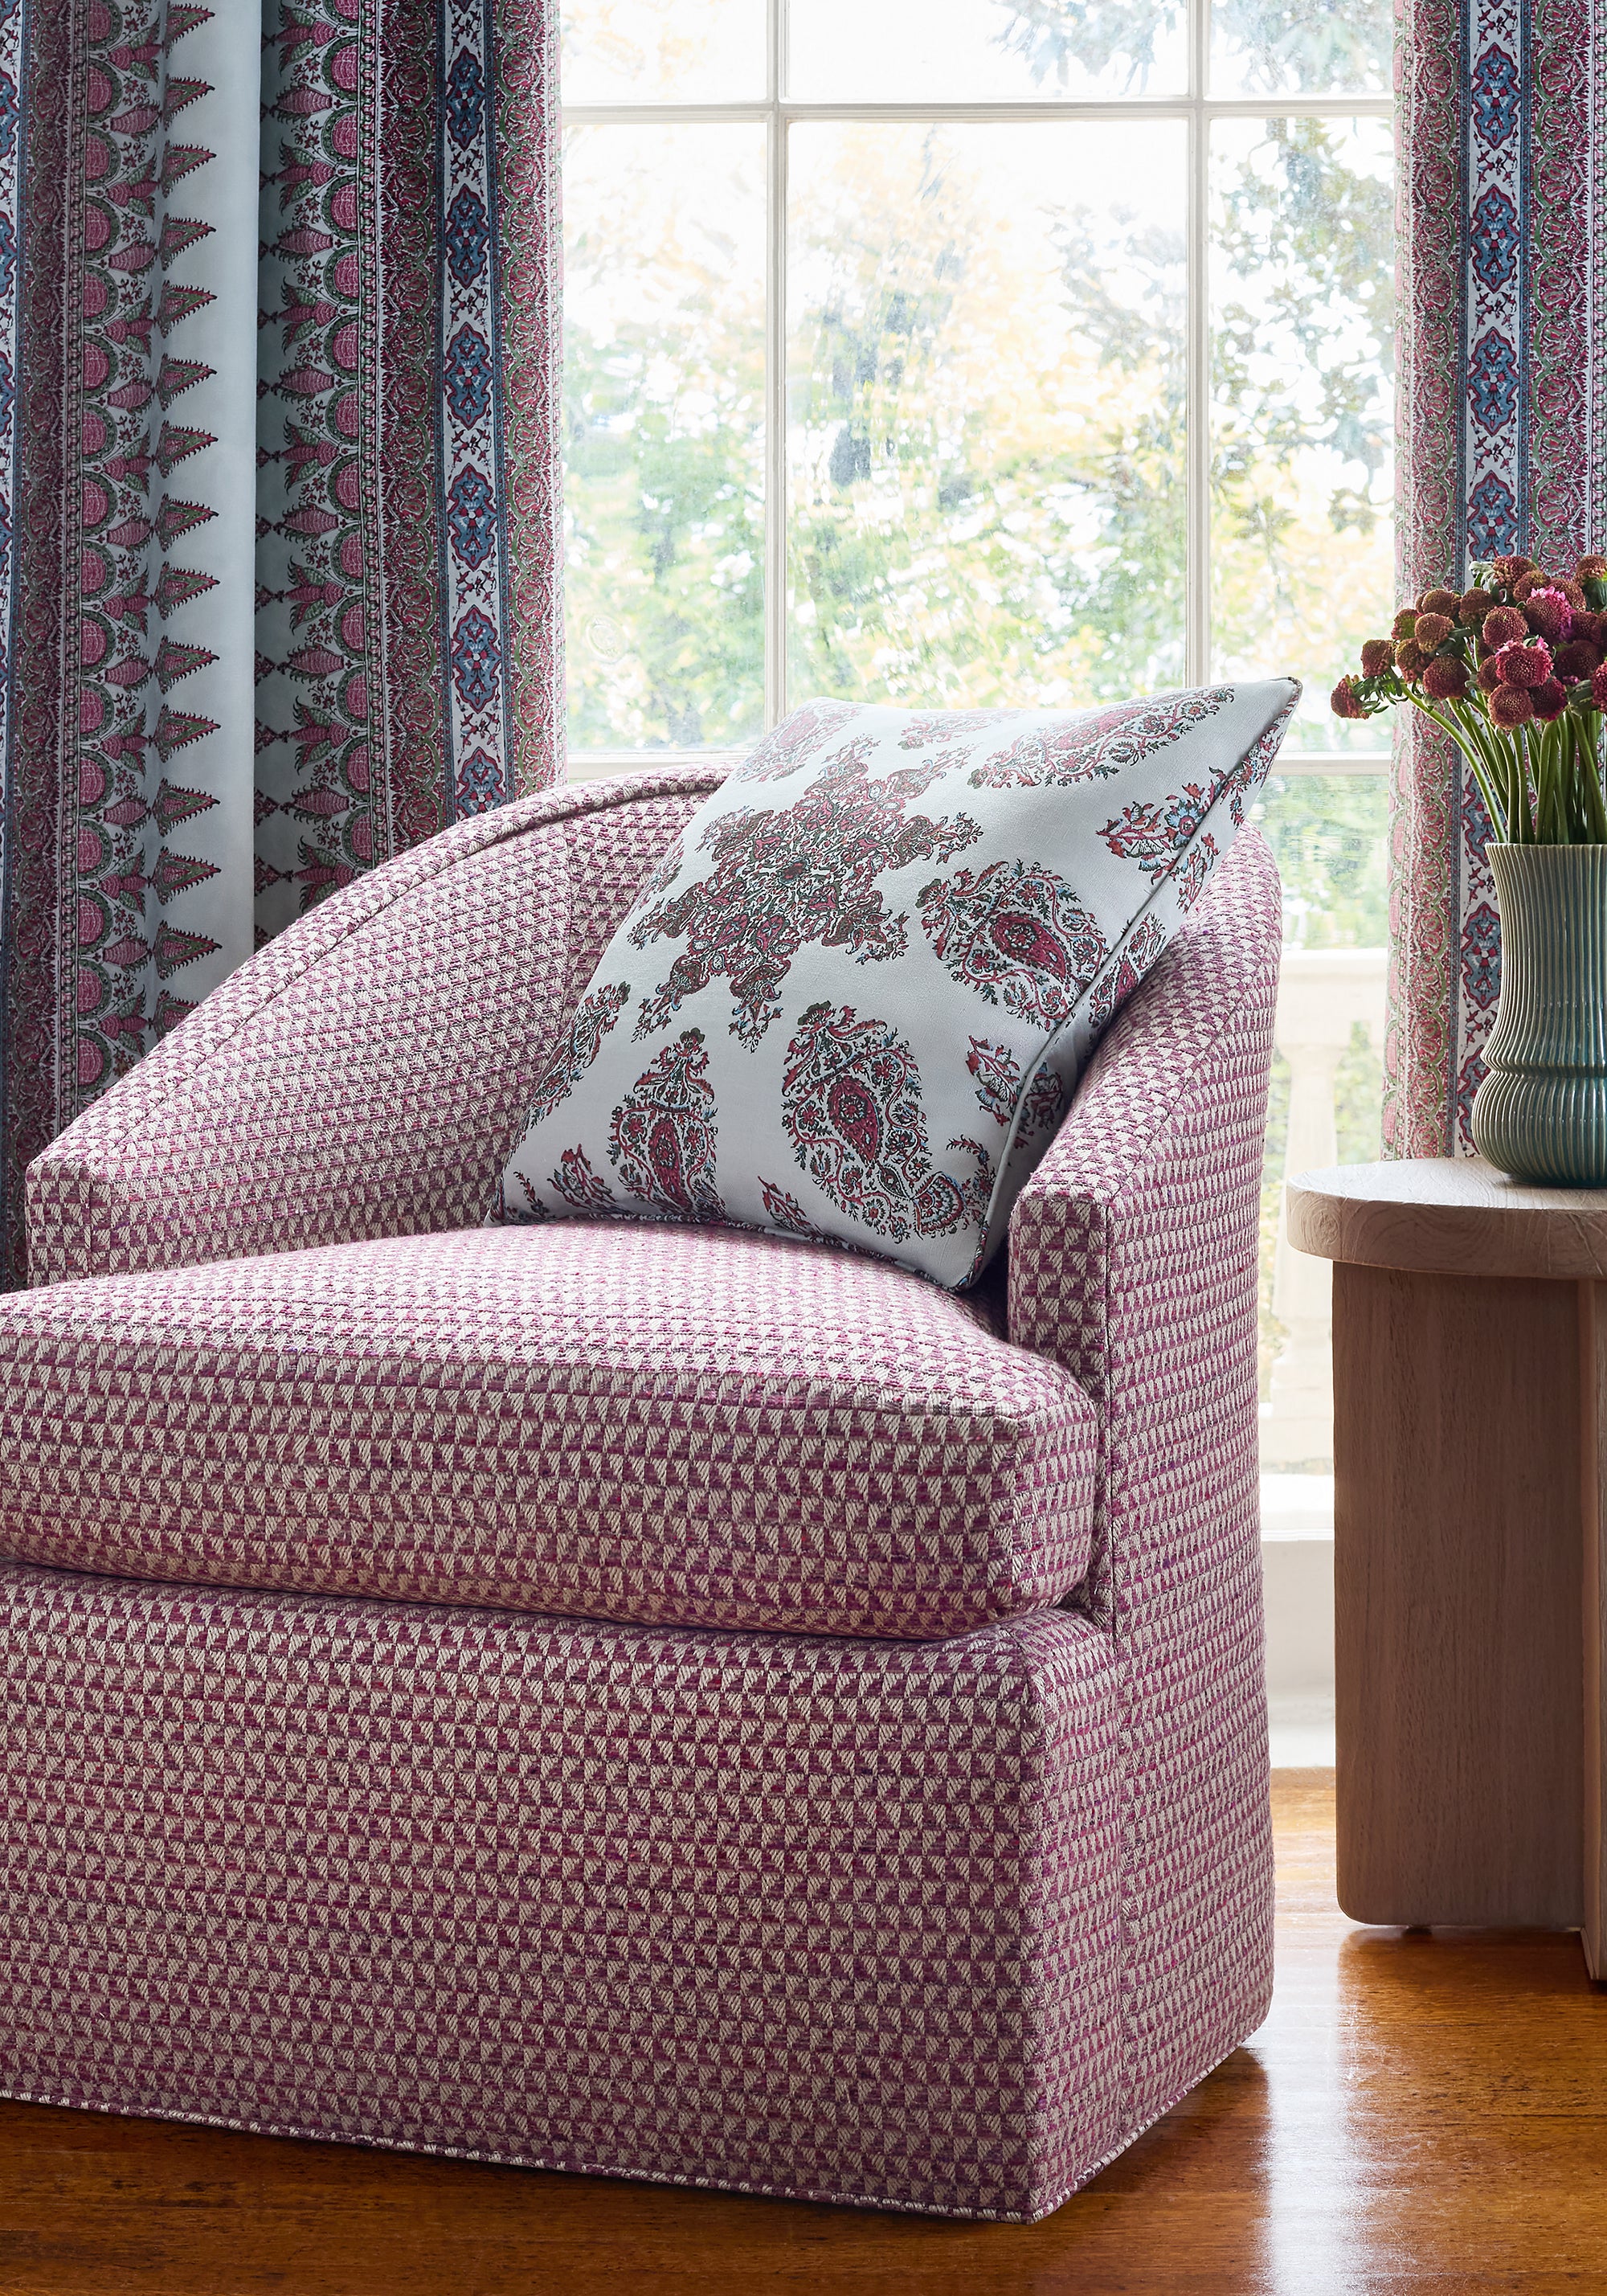 Dexter Chair in Pollux woven fabric in mulberry color - pattern number W81908 by Anna French in the Bristol collection